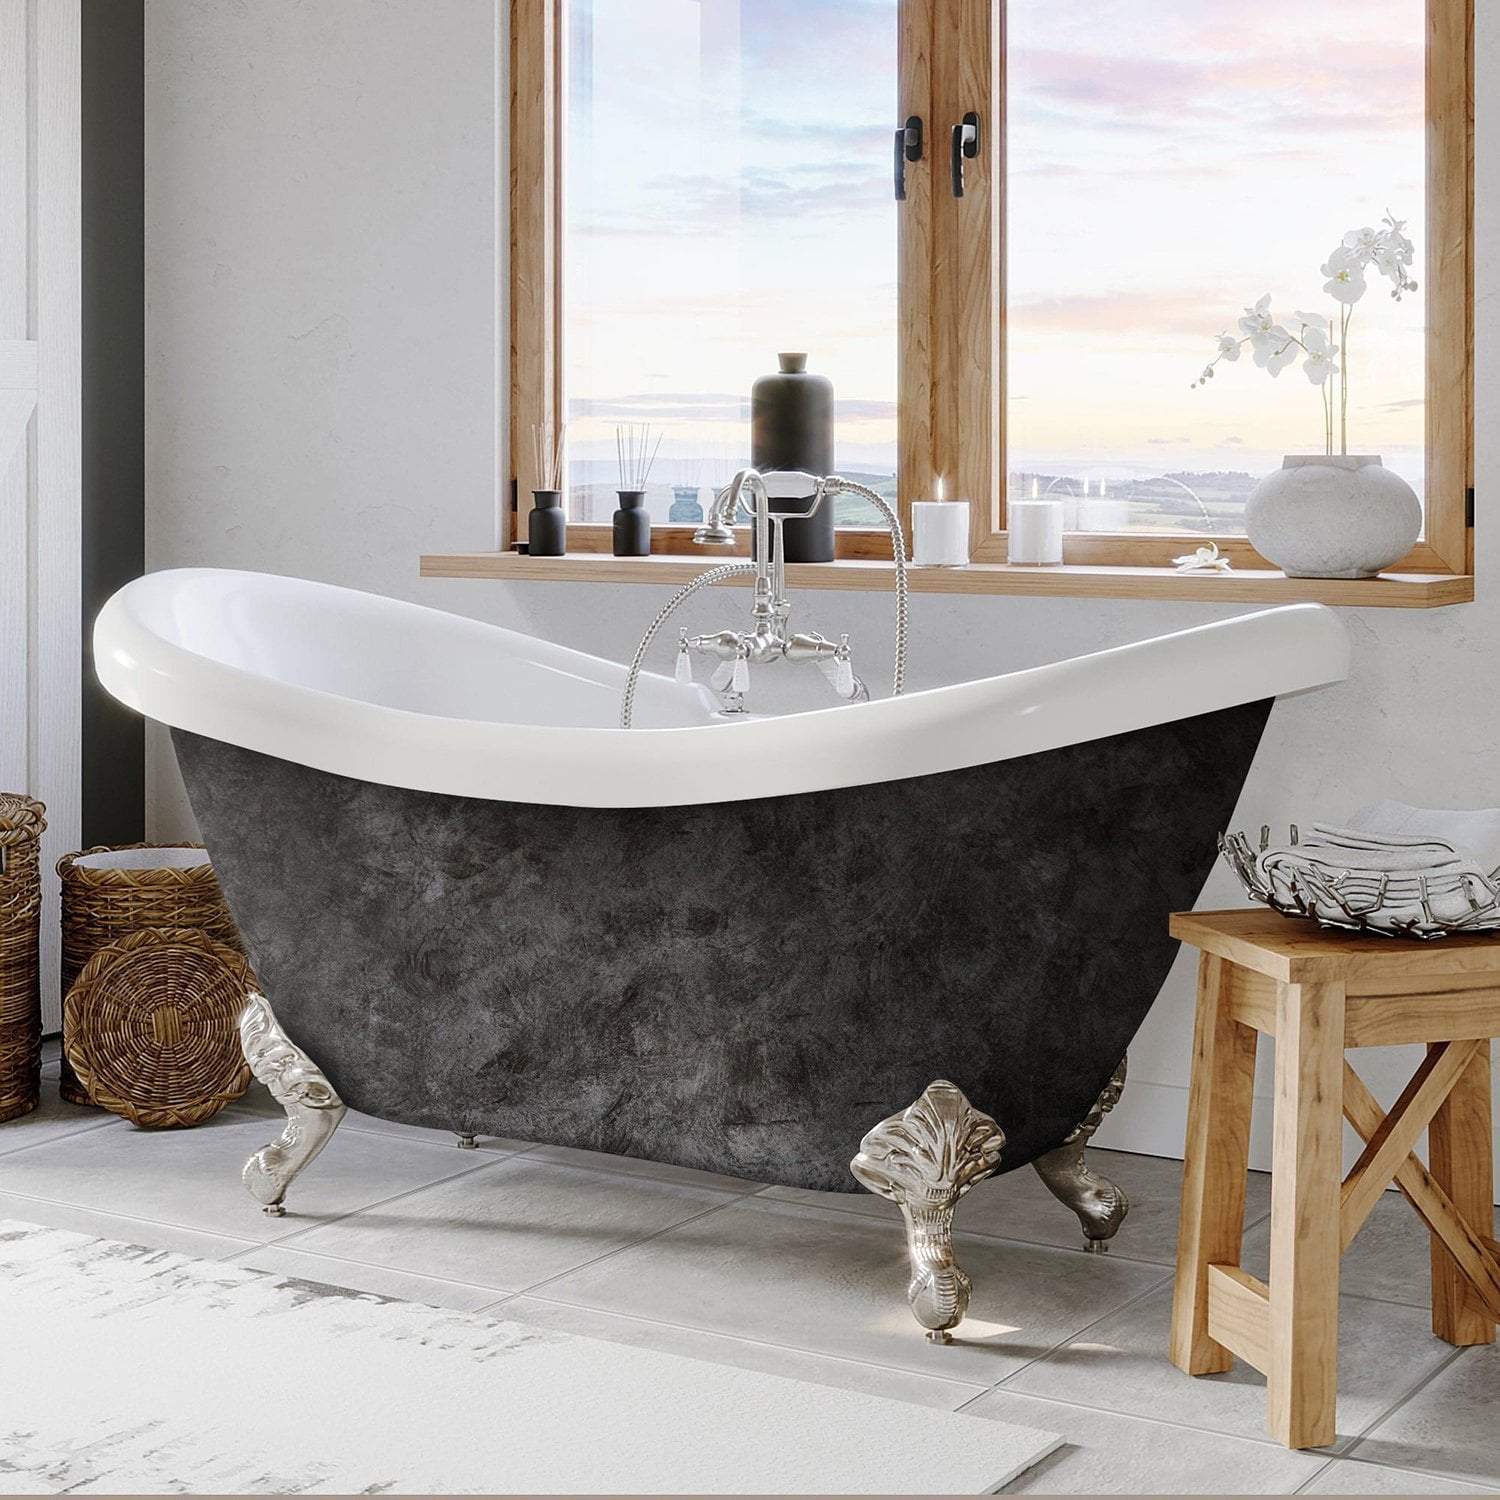 Scorched Platinum Acrylic Double Ended Slipper Bathtub 68" X 28" with 7" Deck Mount Faucet Drillings and Brushed Nickel Feet